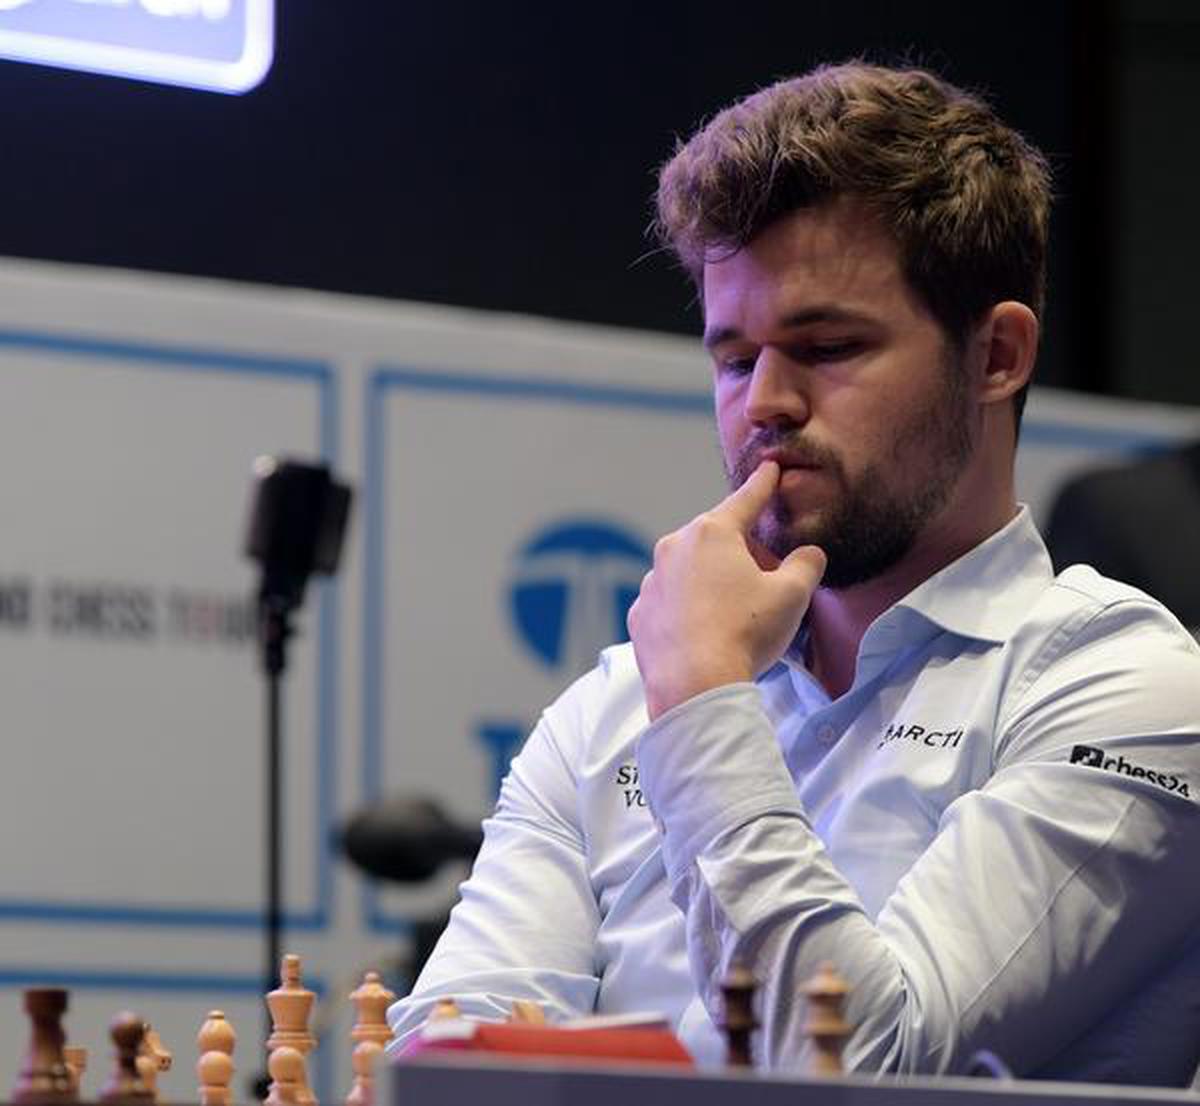 FTX Crypto Cup: Carlsen beats Firouzja in thrilling match, leads